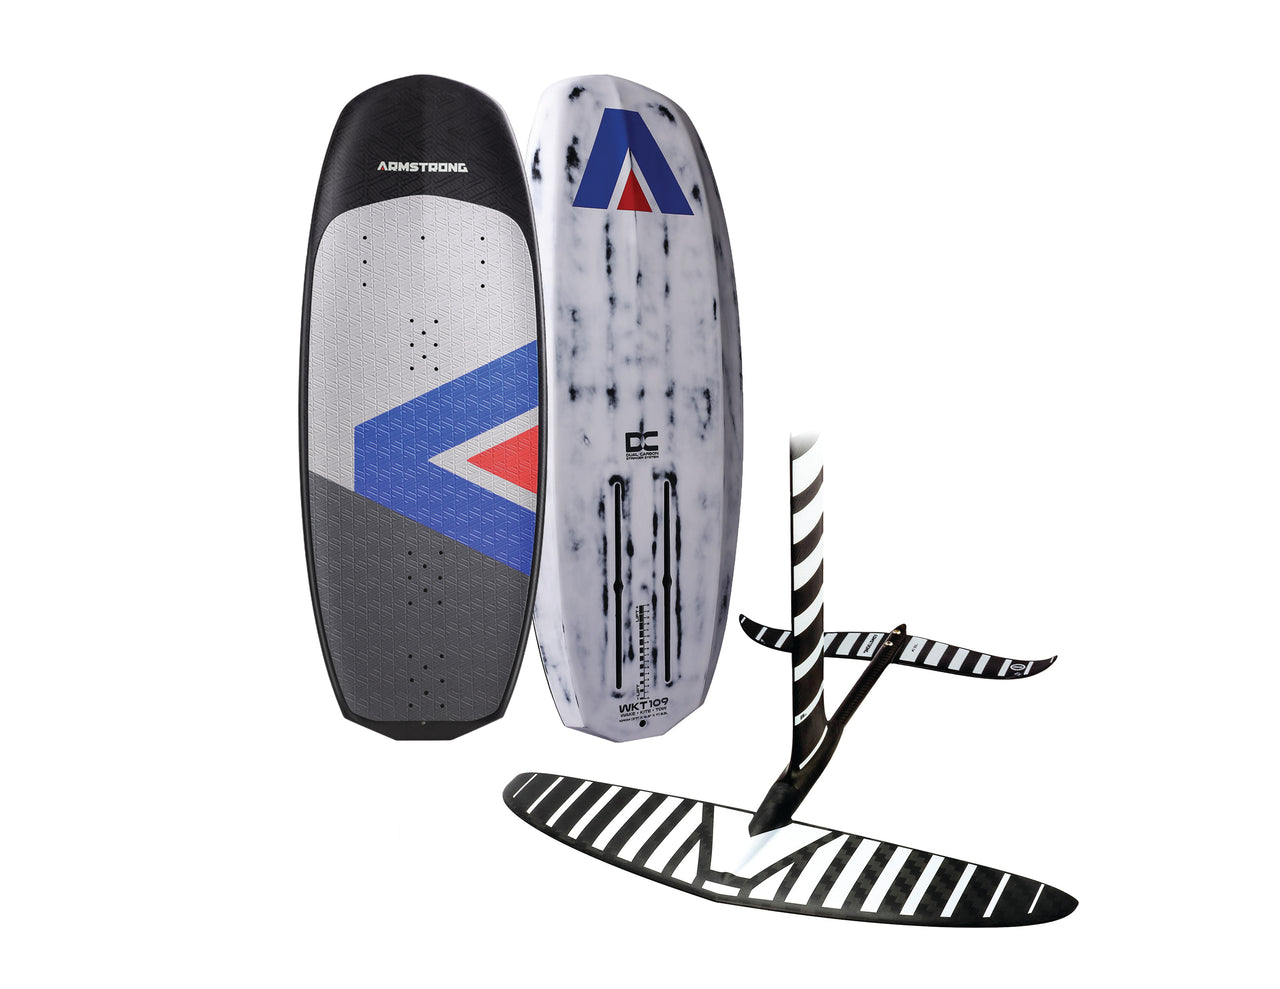 Armstrong Wakefoil Board W/ Armstrong HS850 Foil Kit Package | 2023 | Pre-Order